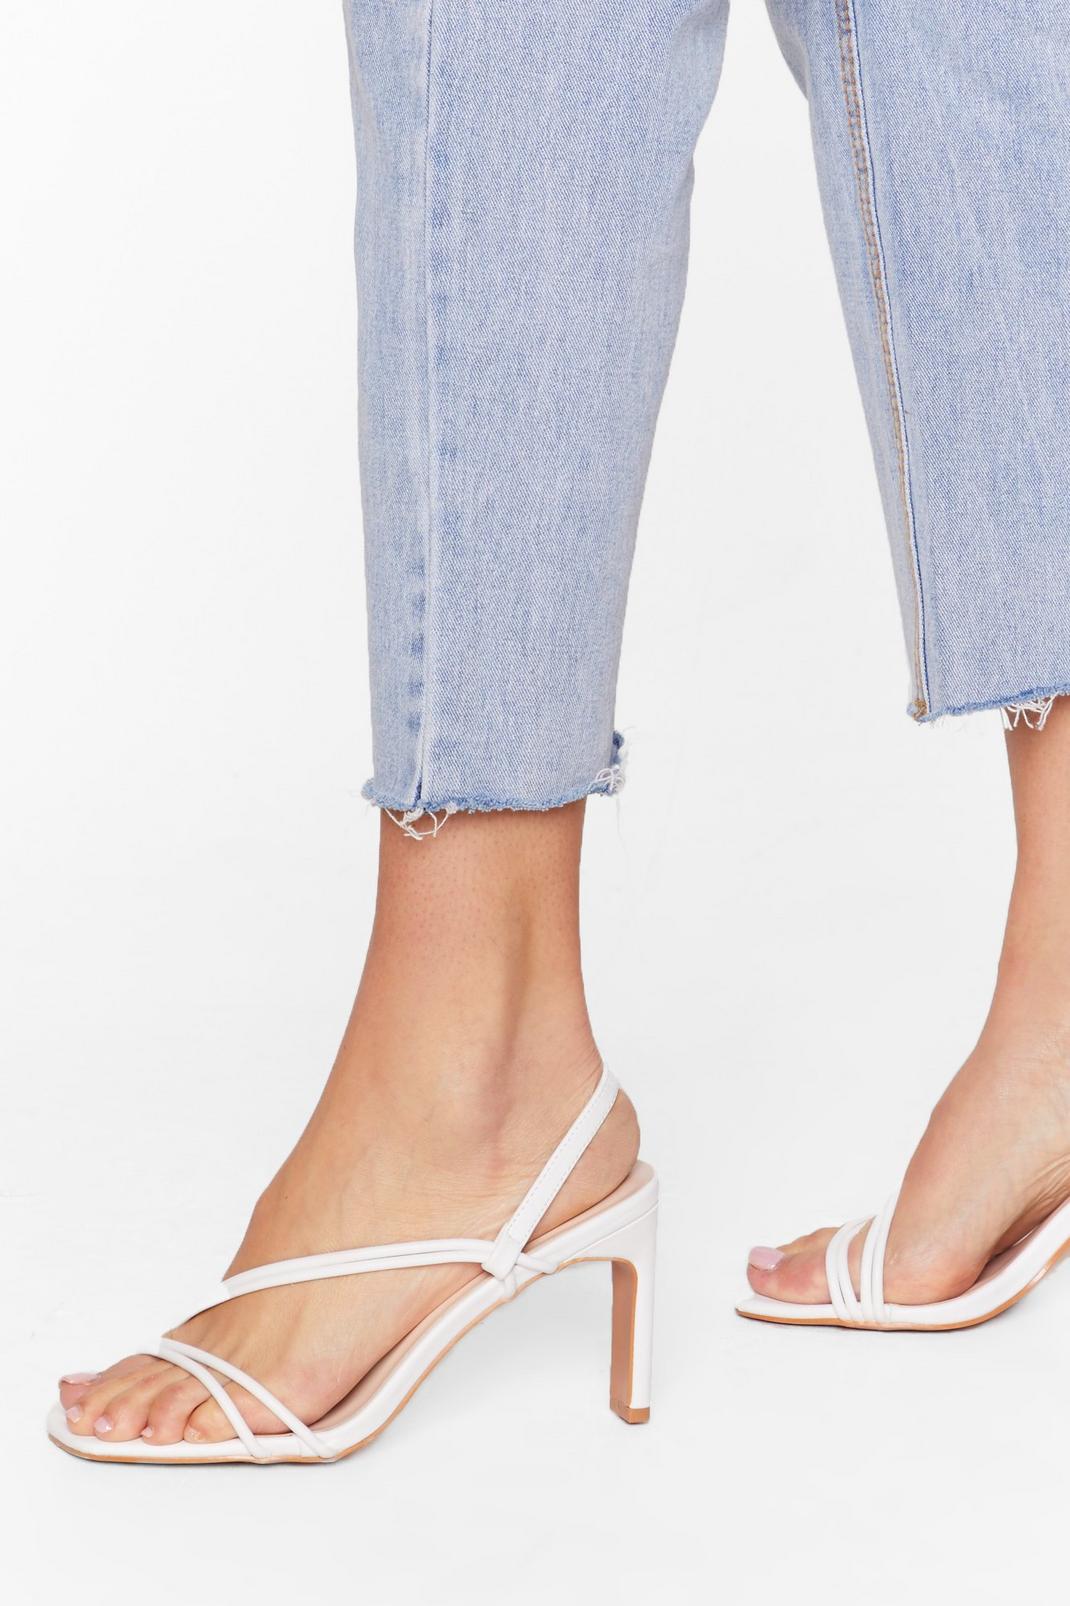 Strappy Square Toe Faux Leather Heels | Nasty Gal